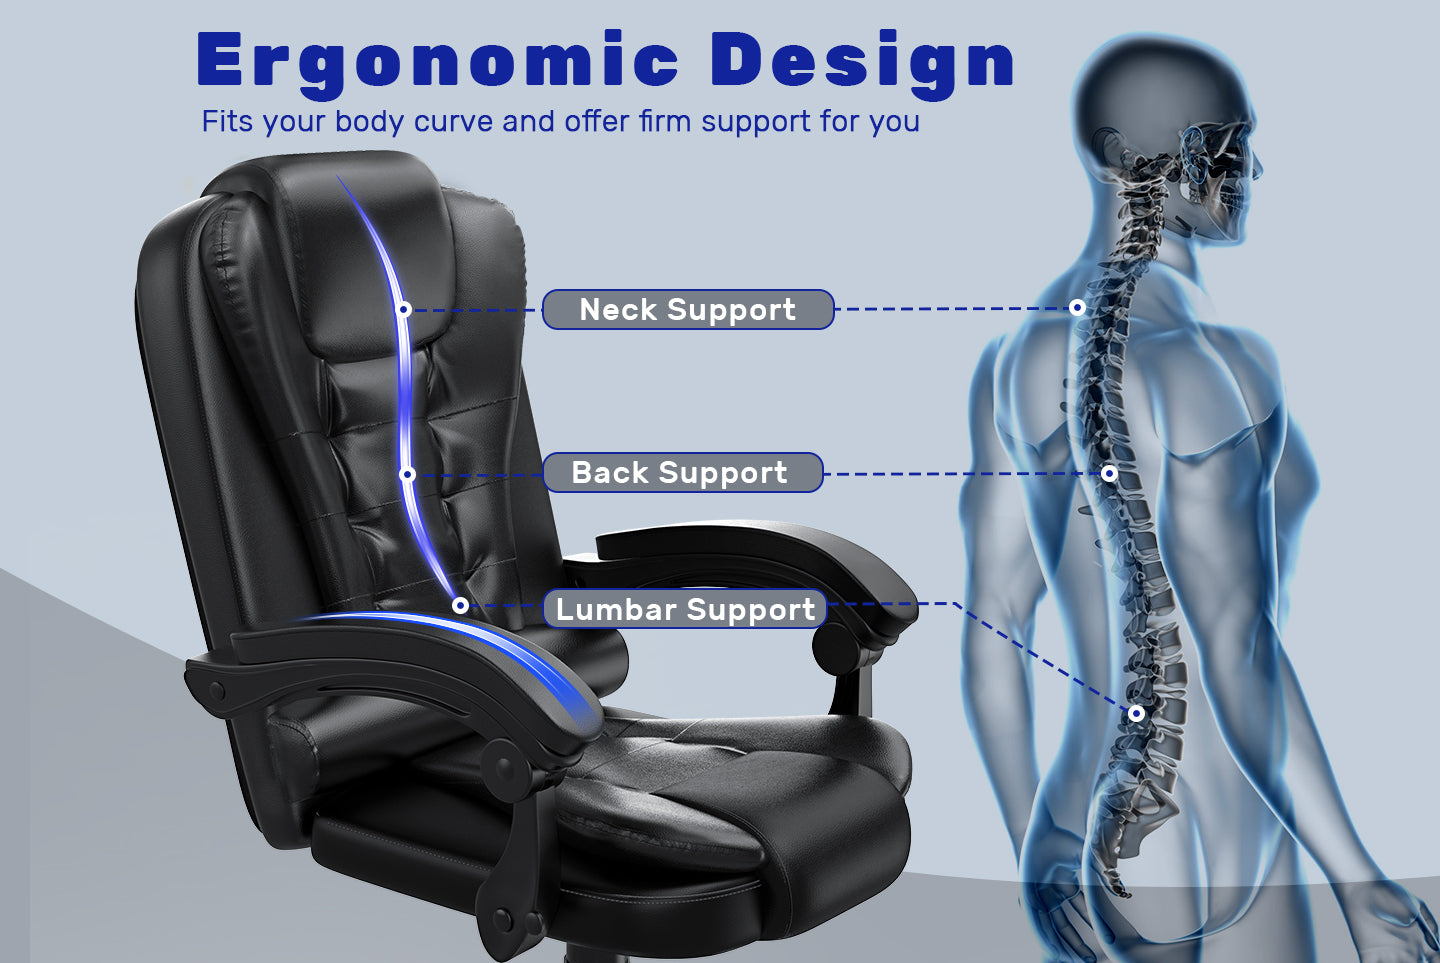 Ergonomic Executive Office Chair PU Leather High Back Computer Desk Chair with Reclining Tilt Function for Home Office Working